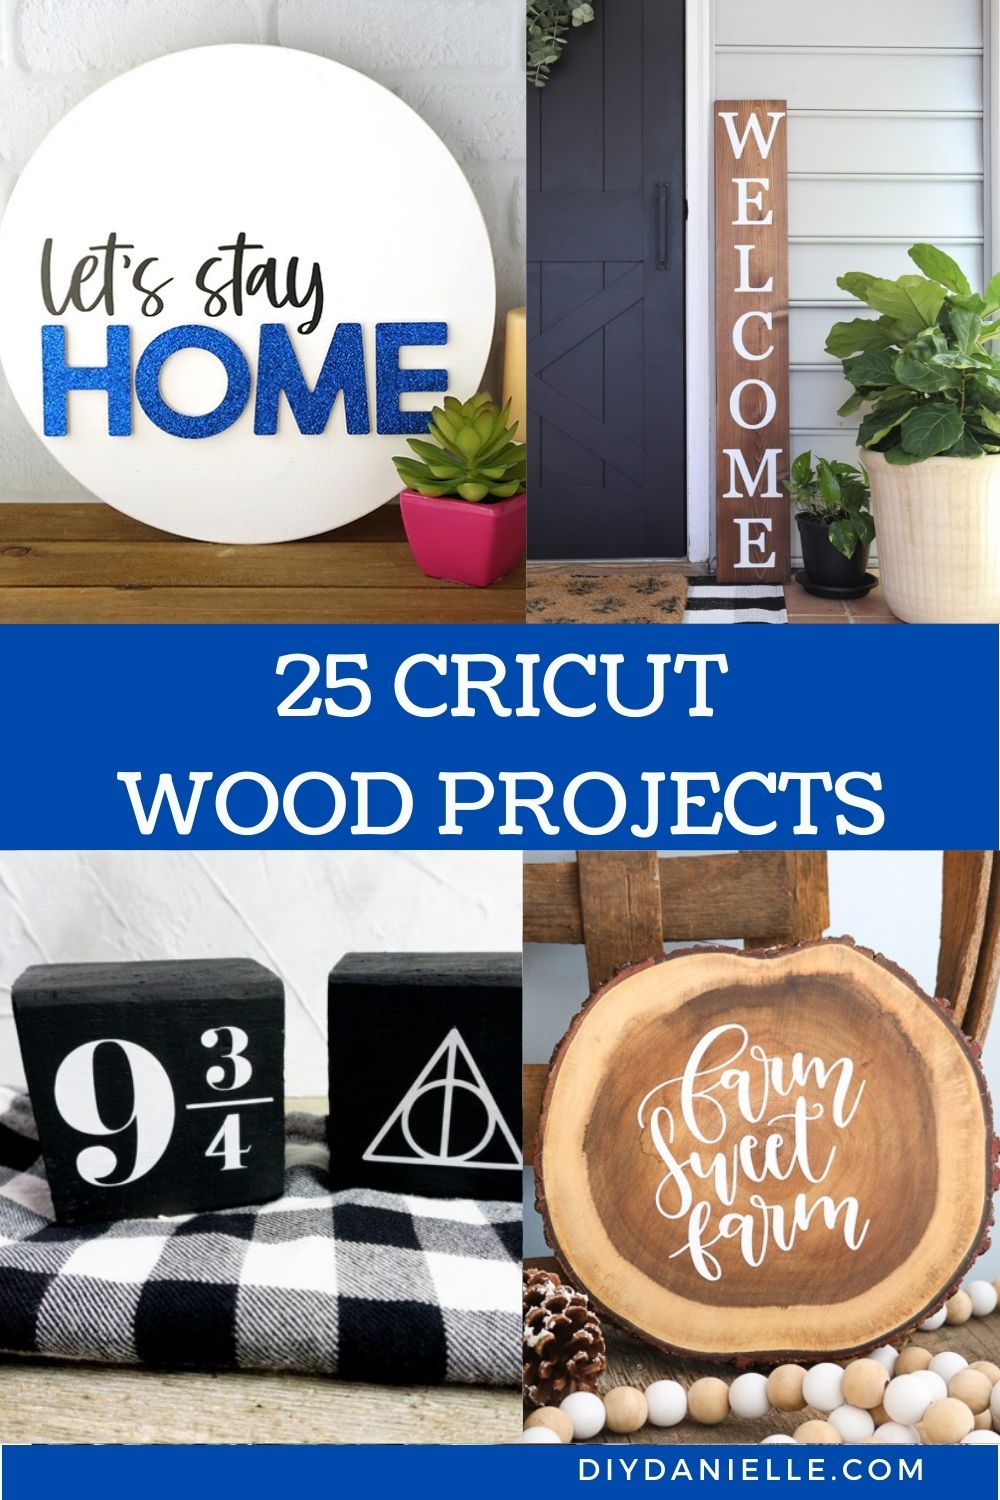 Cricut Maker Wood Projects: 20 Neat Ideas to DIY in 2023